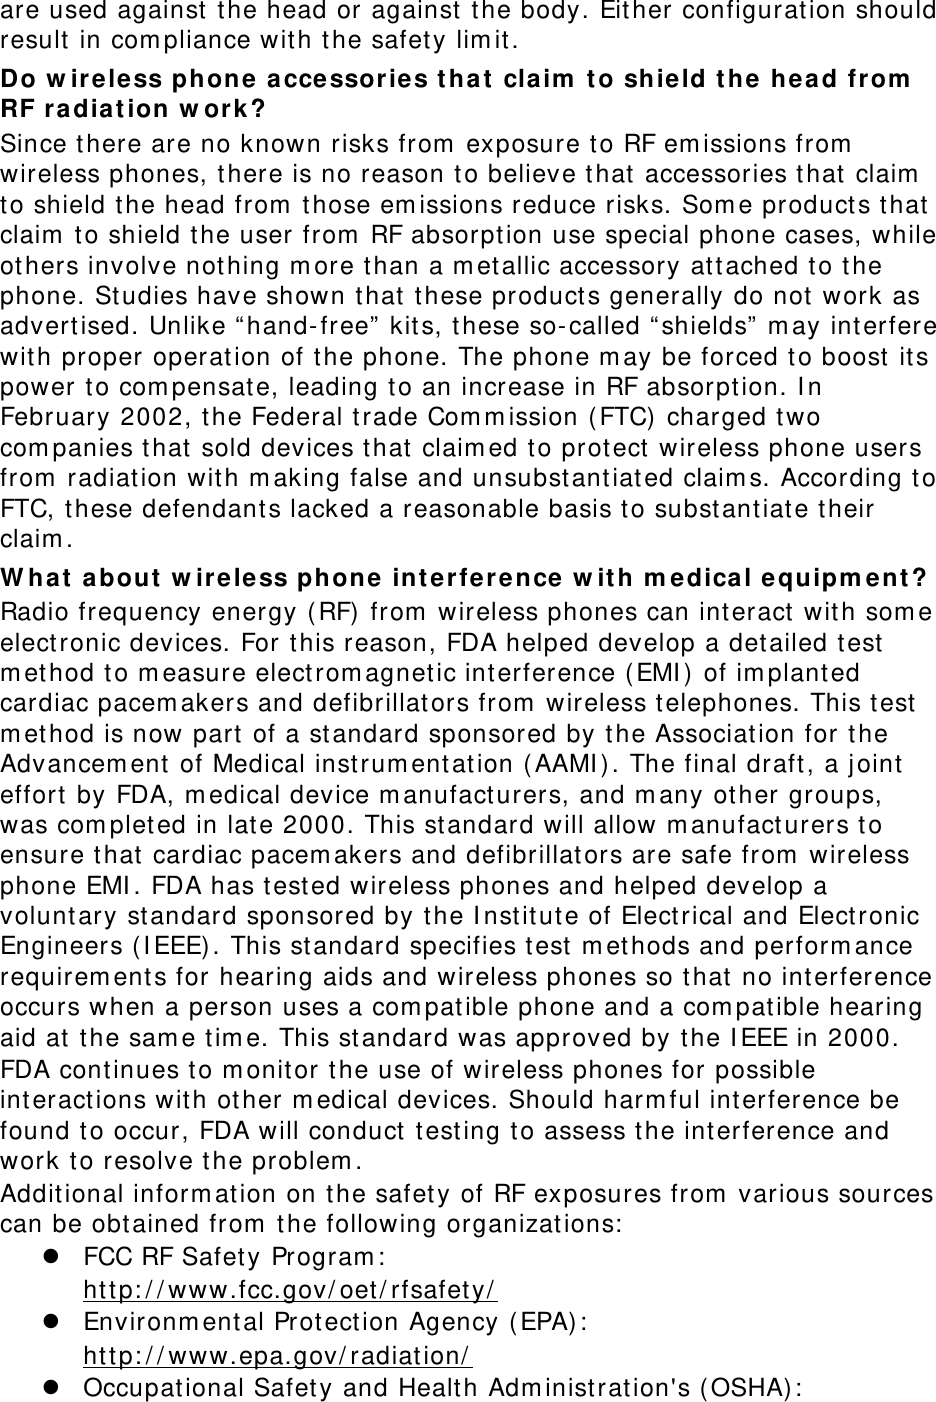 are used against  t he head or against  t he body. Eit her configuration should result  in com pliance with t he safet y lim it. Do w irele ss phone acce ssor ie s tha t  cla im  t o shield t he head fr om  RF ra dia t ion w ork ? Since there are no known risks from  exposure to RF em issions from  wireless phones, t here is no reason t o believe that accessories t hat claim  to shield t he head from  t hose em issions reduce risks. Som e product s t hat claim  t o shield t he user from  RF absorpt ion use special phone cases, while others involve not hing m ore than a m et allic accessory att ached to t he phone. Studies have shown t hat t hese product s generally do not work as advert ised. Unlike “ hand- free”  kit s, t hese so-called “ shields”  m ay int erfere with proper operation of the phone. The phone m ay be forced t o boost  its power t o com pensat e, leading t o an increase in RF absorpt ion. I n February 2002, the Federal t rade Com m ission ( FTC) charged t wo com panies t hat sold devices t hat claim ed t o protect  wireless phone users from  radiat ion with m aking false and unsubstant iated claim s. According t o FTC, t hese defendant s lacked a reasonable basis t o substantiat e their claim . W ha t a bout  w ire le ss phone int e r fe r e n ce  w ith m edical e quipm ent ? Radio frequency energy ( RF) from  wireless phones can int eract  wit h som e elect ronic devices. For this reason, FDA helped develop a det ailed test  m et hod t o m easure elect rom agnetic int erference ( EMI )  of im plant ed cardiac pacem akers and defibrillators from  wireless t elephones. This t est  m et hod is now part  of a standard sponsored by t he Association for t he Advancem ent  of Medical inst rum entation ( AAMI ) . The final draft , a j oint  effort  by FDA, m edical device m anufact urers, and m any other groups, was com plet ed in late 2000. This standard will allow m anufact urers t o ensure that  cardiac pacem akers and defibrillators are safe from  wireless phone EMI . FDA has t est ed wireless phones and helped develop a voluntary st andard sponsored by t he I nstitut e of Elect rical and Elect ronic Engineers ( I EEE) . This standard specifies t est m et hods and perform ance requirem ent s for hearing aids and wireless phones so t hat no int erference occurs when a person uses a com patible phone and a com patible hearing aid at  t he sam e t im e. This standard was approved by the I EEE in 2000. FDA cont inues t o m onitor t he use of wireless phones for possible interactions with other m edical devices. Should harm ful interference be found t o occur, FDA will conduct test ing t o assess t he interference and work to resolve the problem . Additional inform ation on t he safety of RF exposures from  various sources can be obtained from  t he following organizat ions:  z FCC RF Safet y Program :   htt p: / / www.fcc.gov/ oet / rfsafet y/  z Environm ental Protect ion Agency ( EPA) :   htt p: / / www.epa.gov/ radiation/  z Occupational Safet y and Health Adm inist rat ion&apos;s ( OSHA) :    